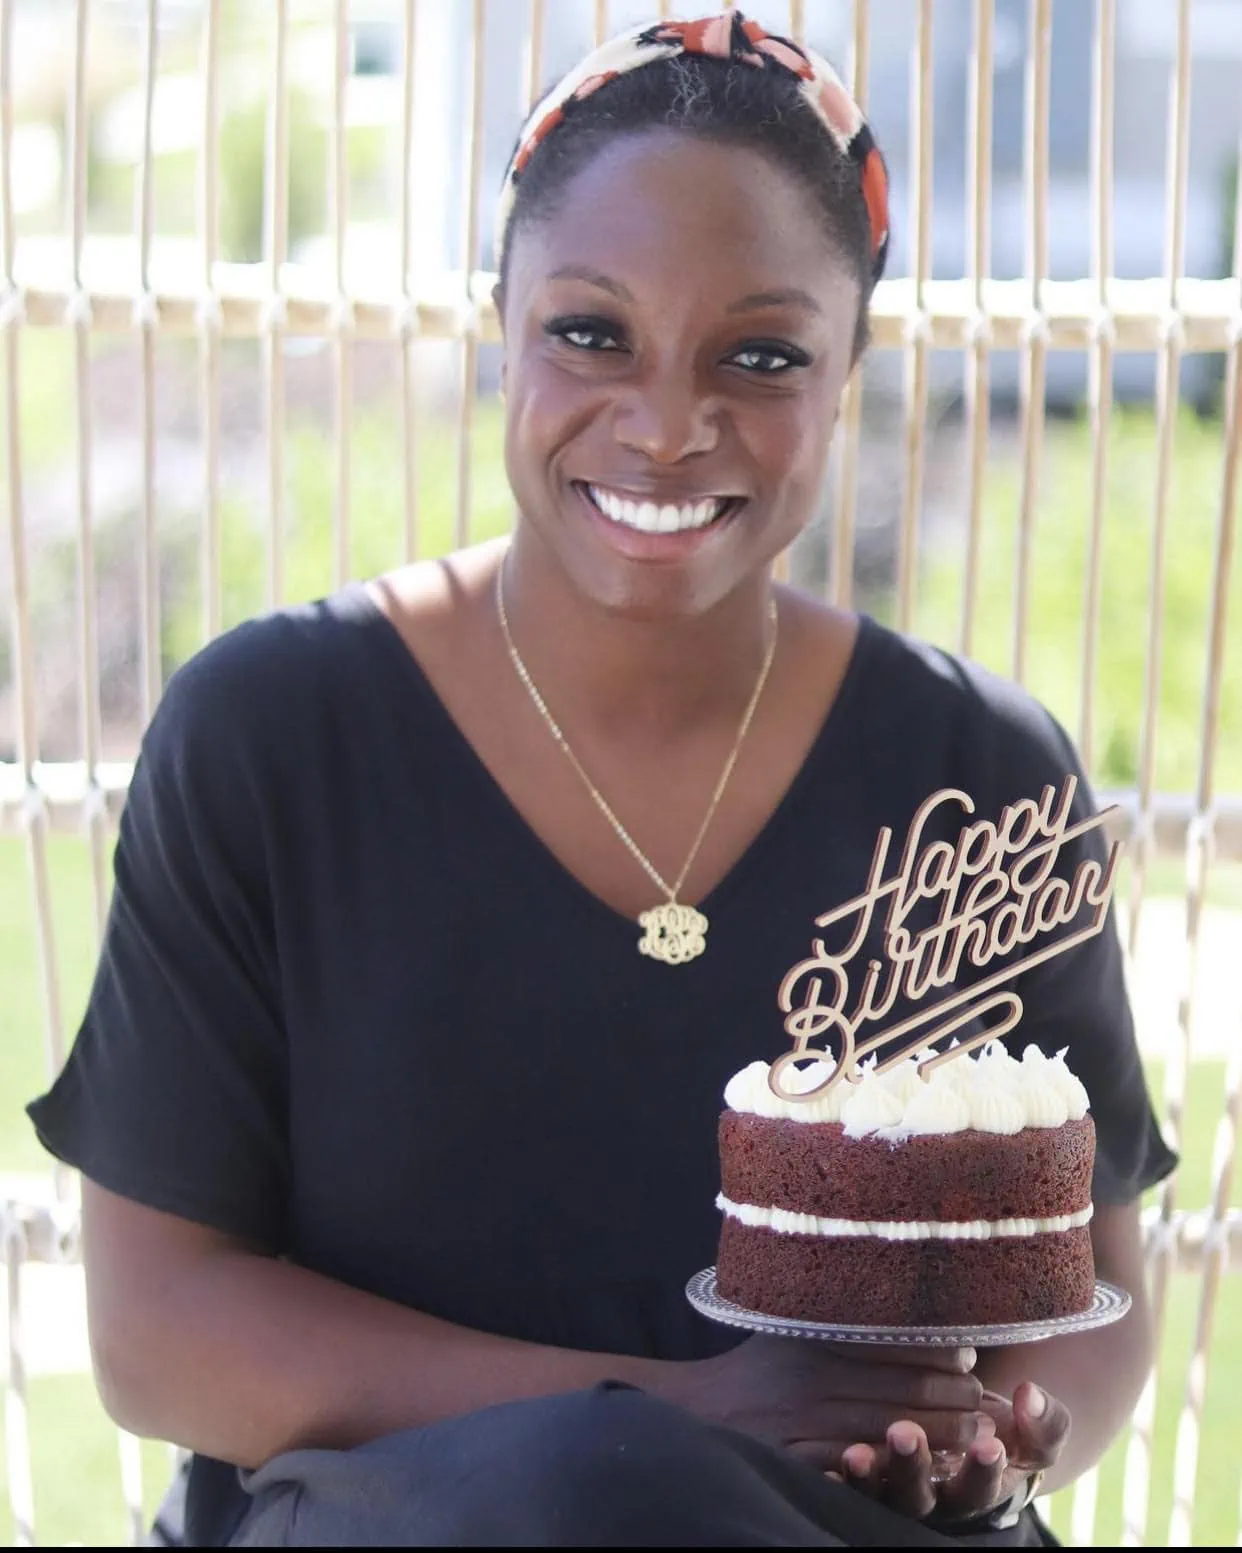 Sheryl Garner holds a red velvet cake and smiles at the camera. She's wearing a black top and a gold necklace.